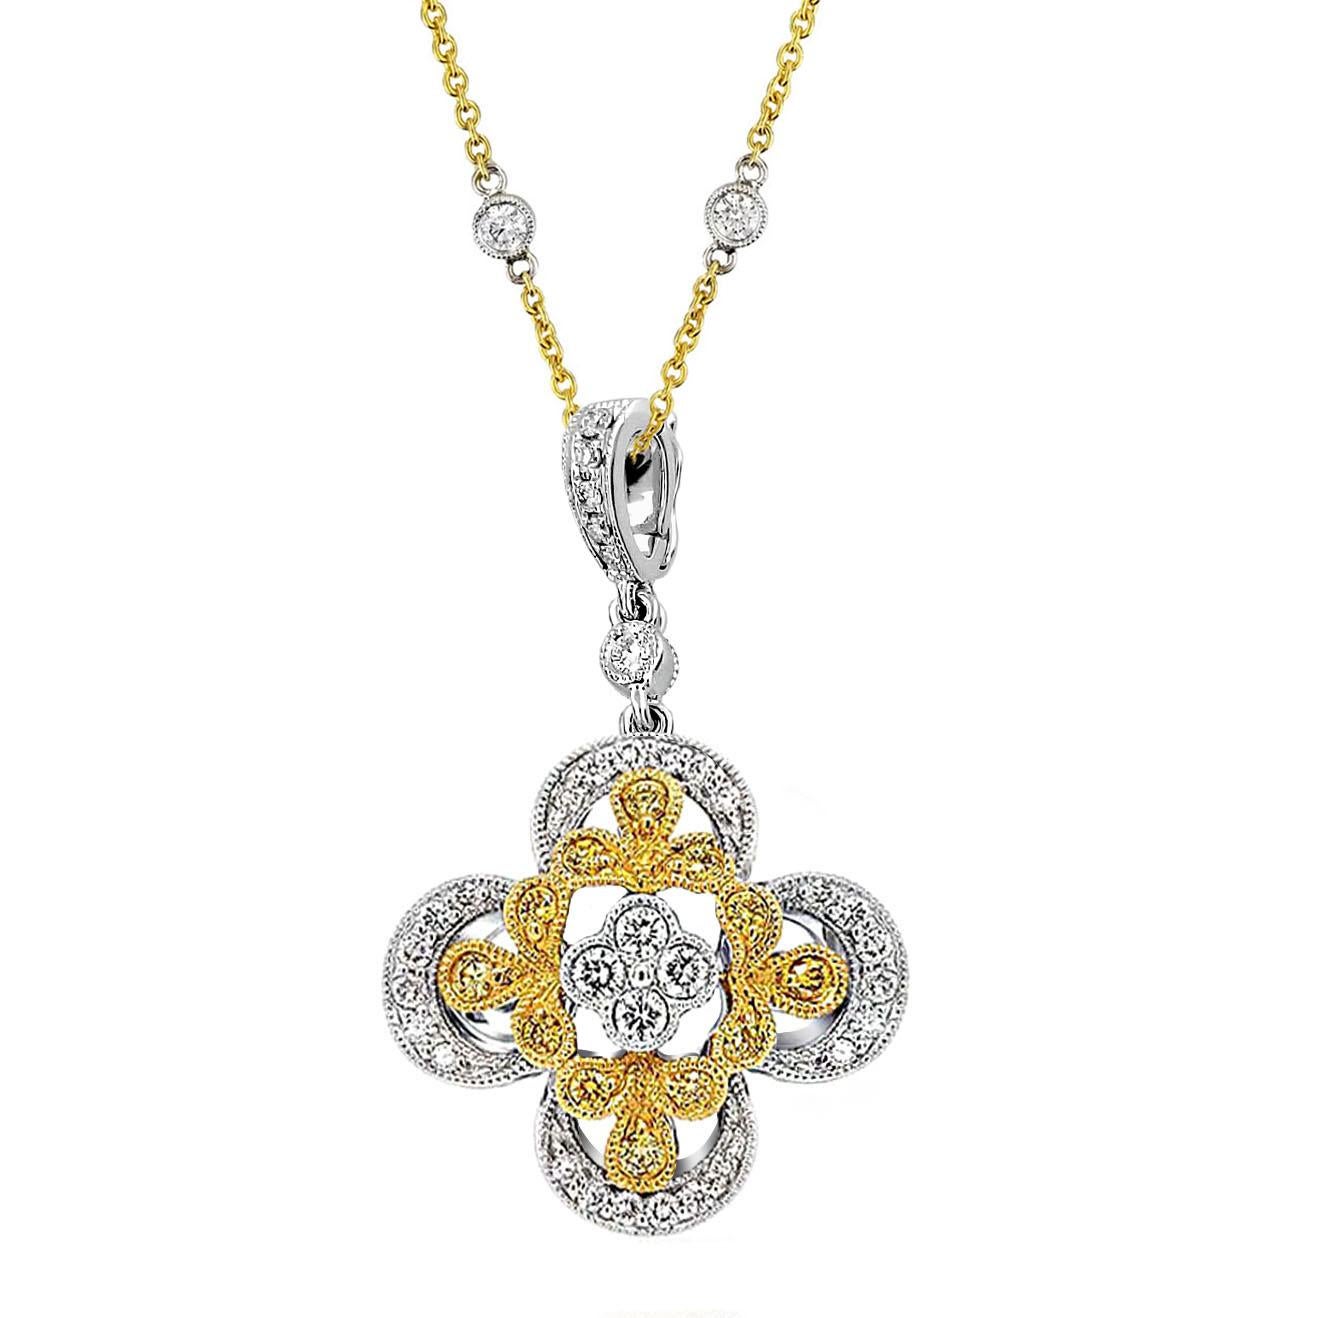 Produced by award winning Italian designer Stefano Vitolo. Stefano creates custom artisanal one of a kind jewelry with excellent gemstones in a truly old world Italian craftmanship.
This diamond pendant has 0.25 carat weight of F/G color and 0.14